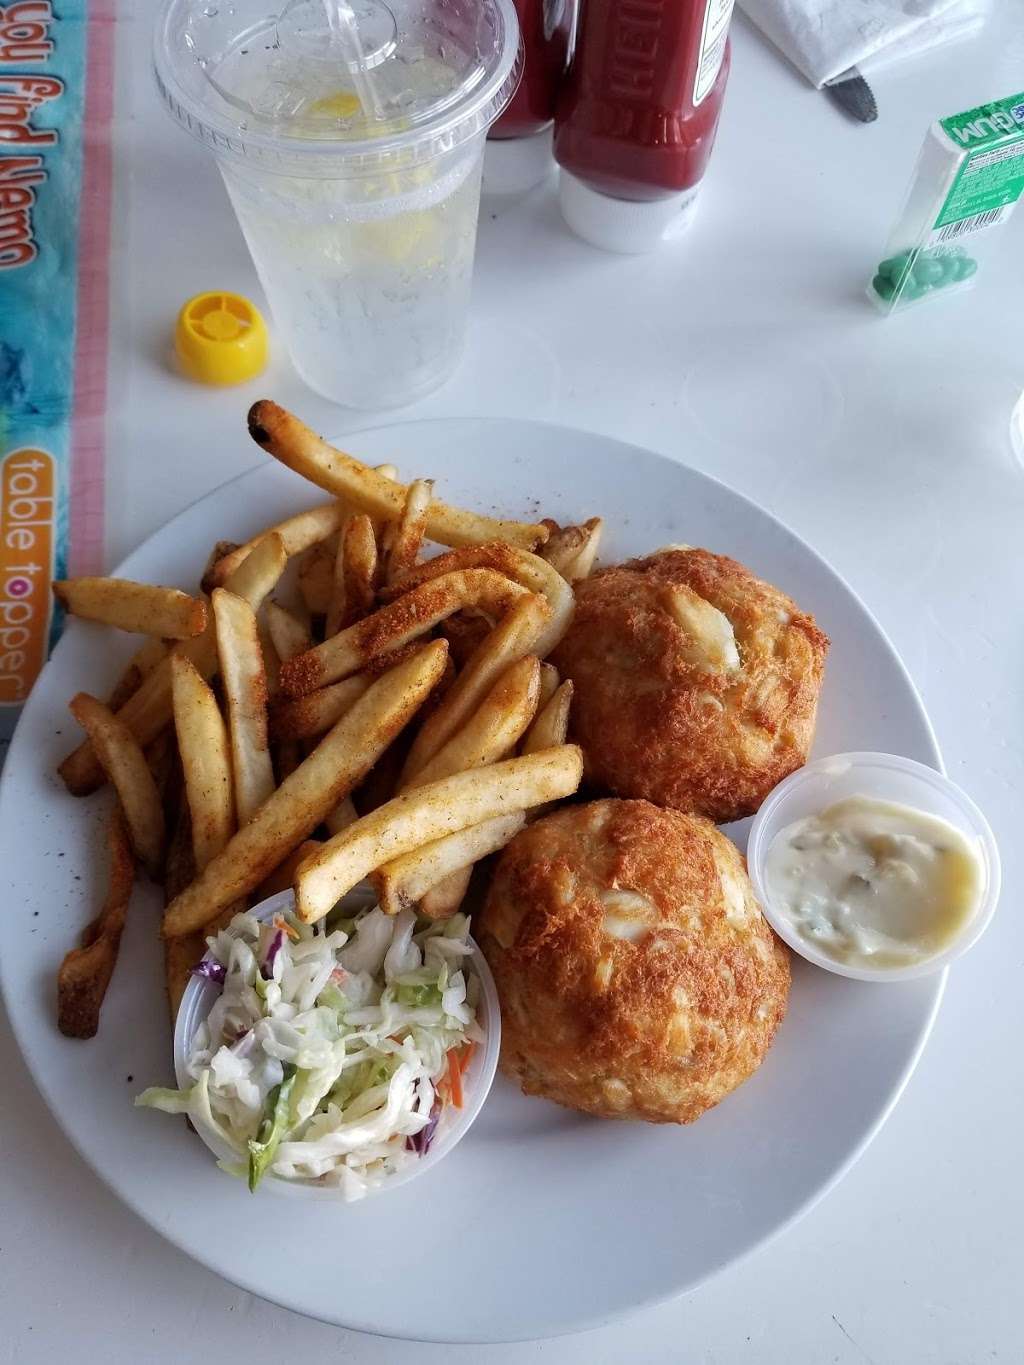 Stoneys Seafood House | 3939 Oyster House Rd, Broomes Island, MD 20615, USA | Phone: (410) 586-1888